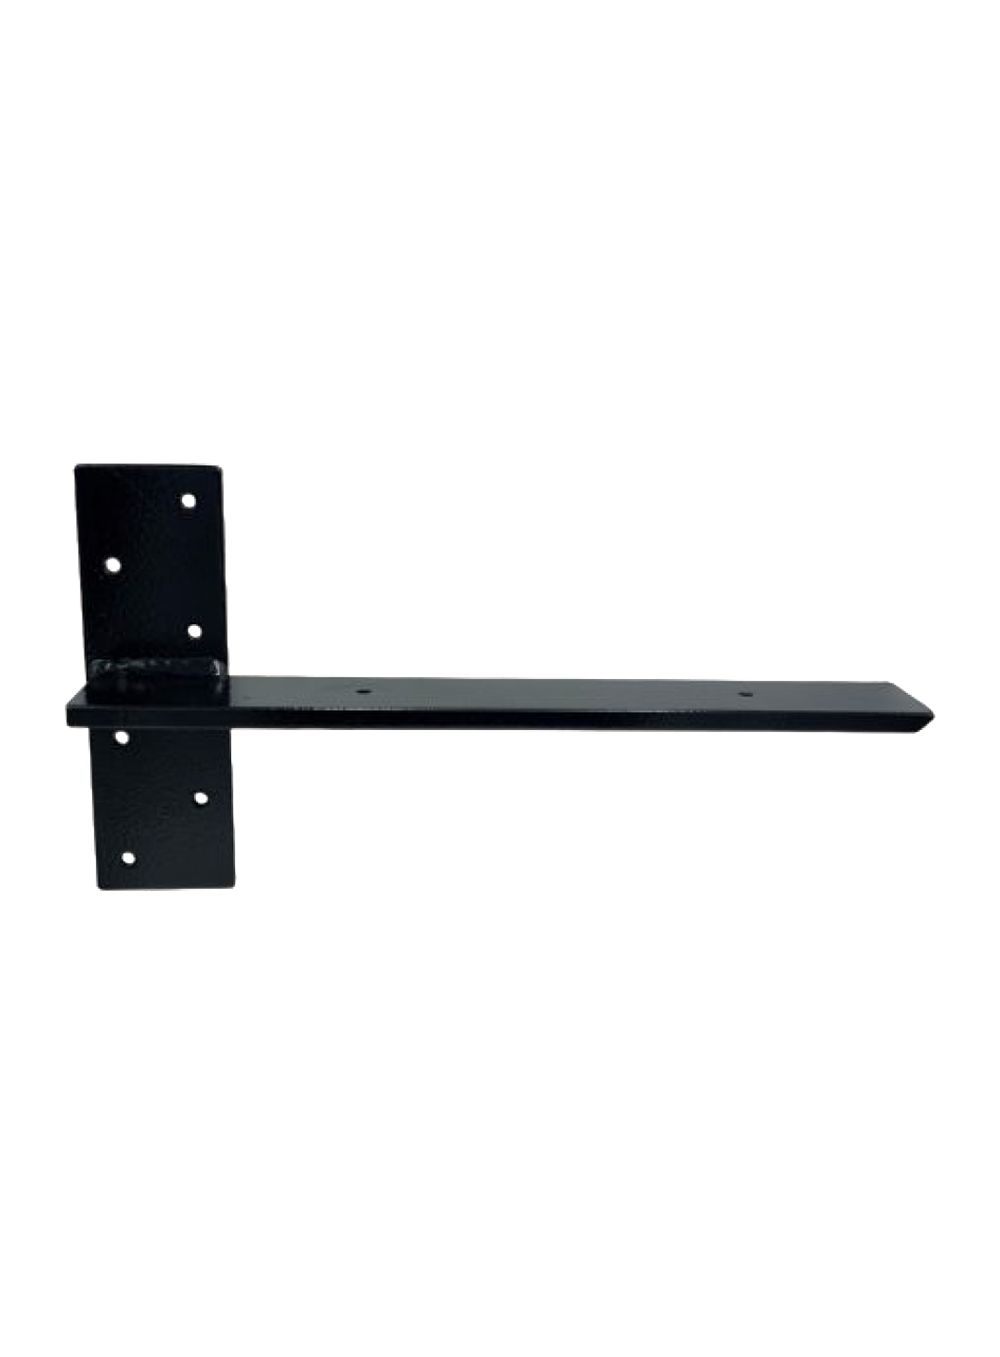 I am trying to order some floating shelf brackets -heavy duty- system wont let me - pls help